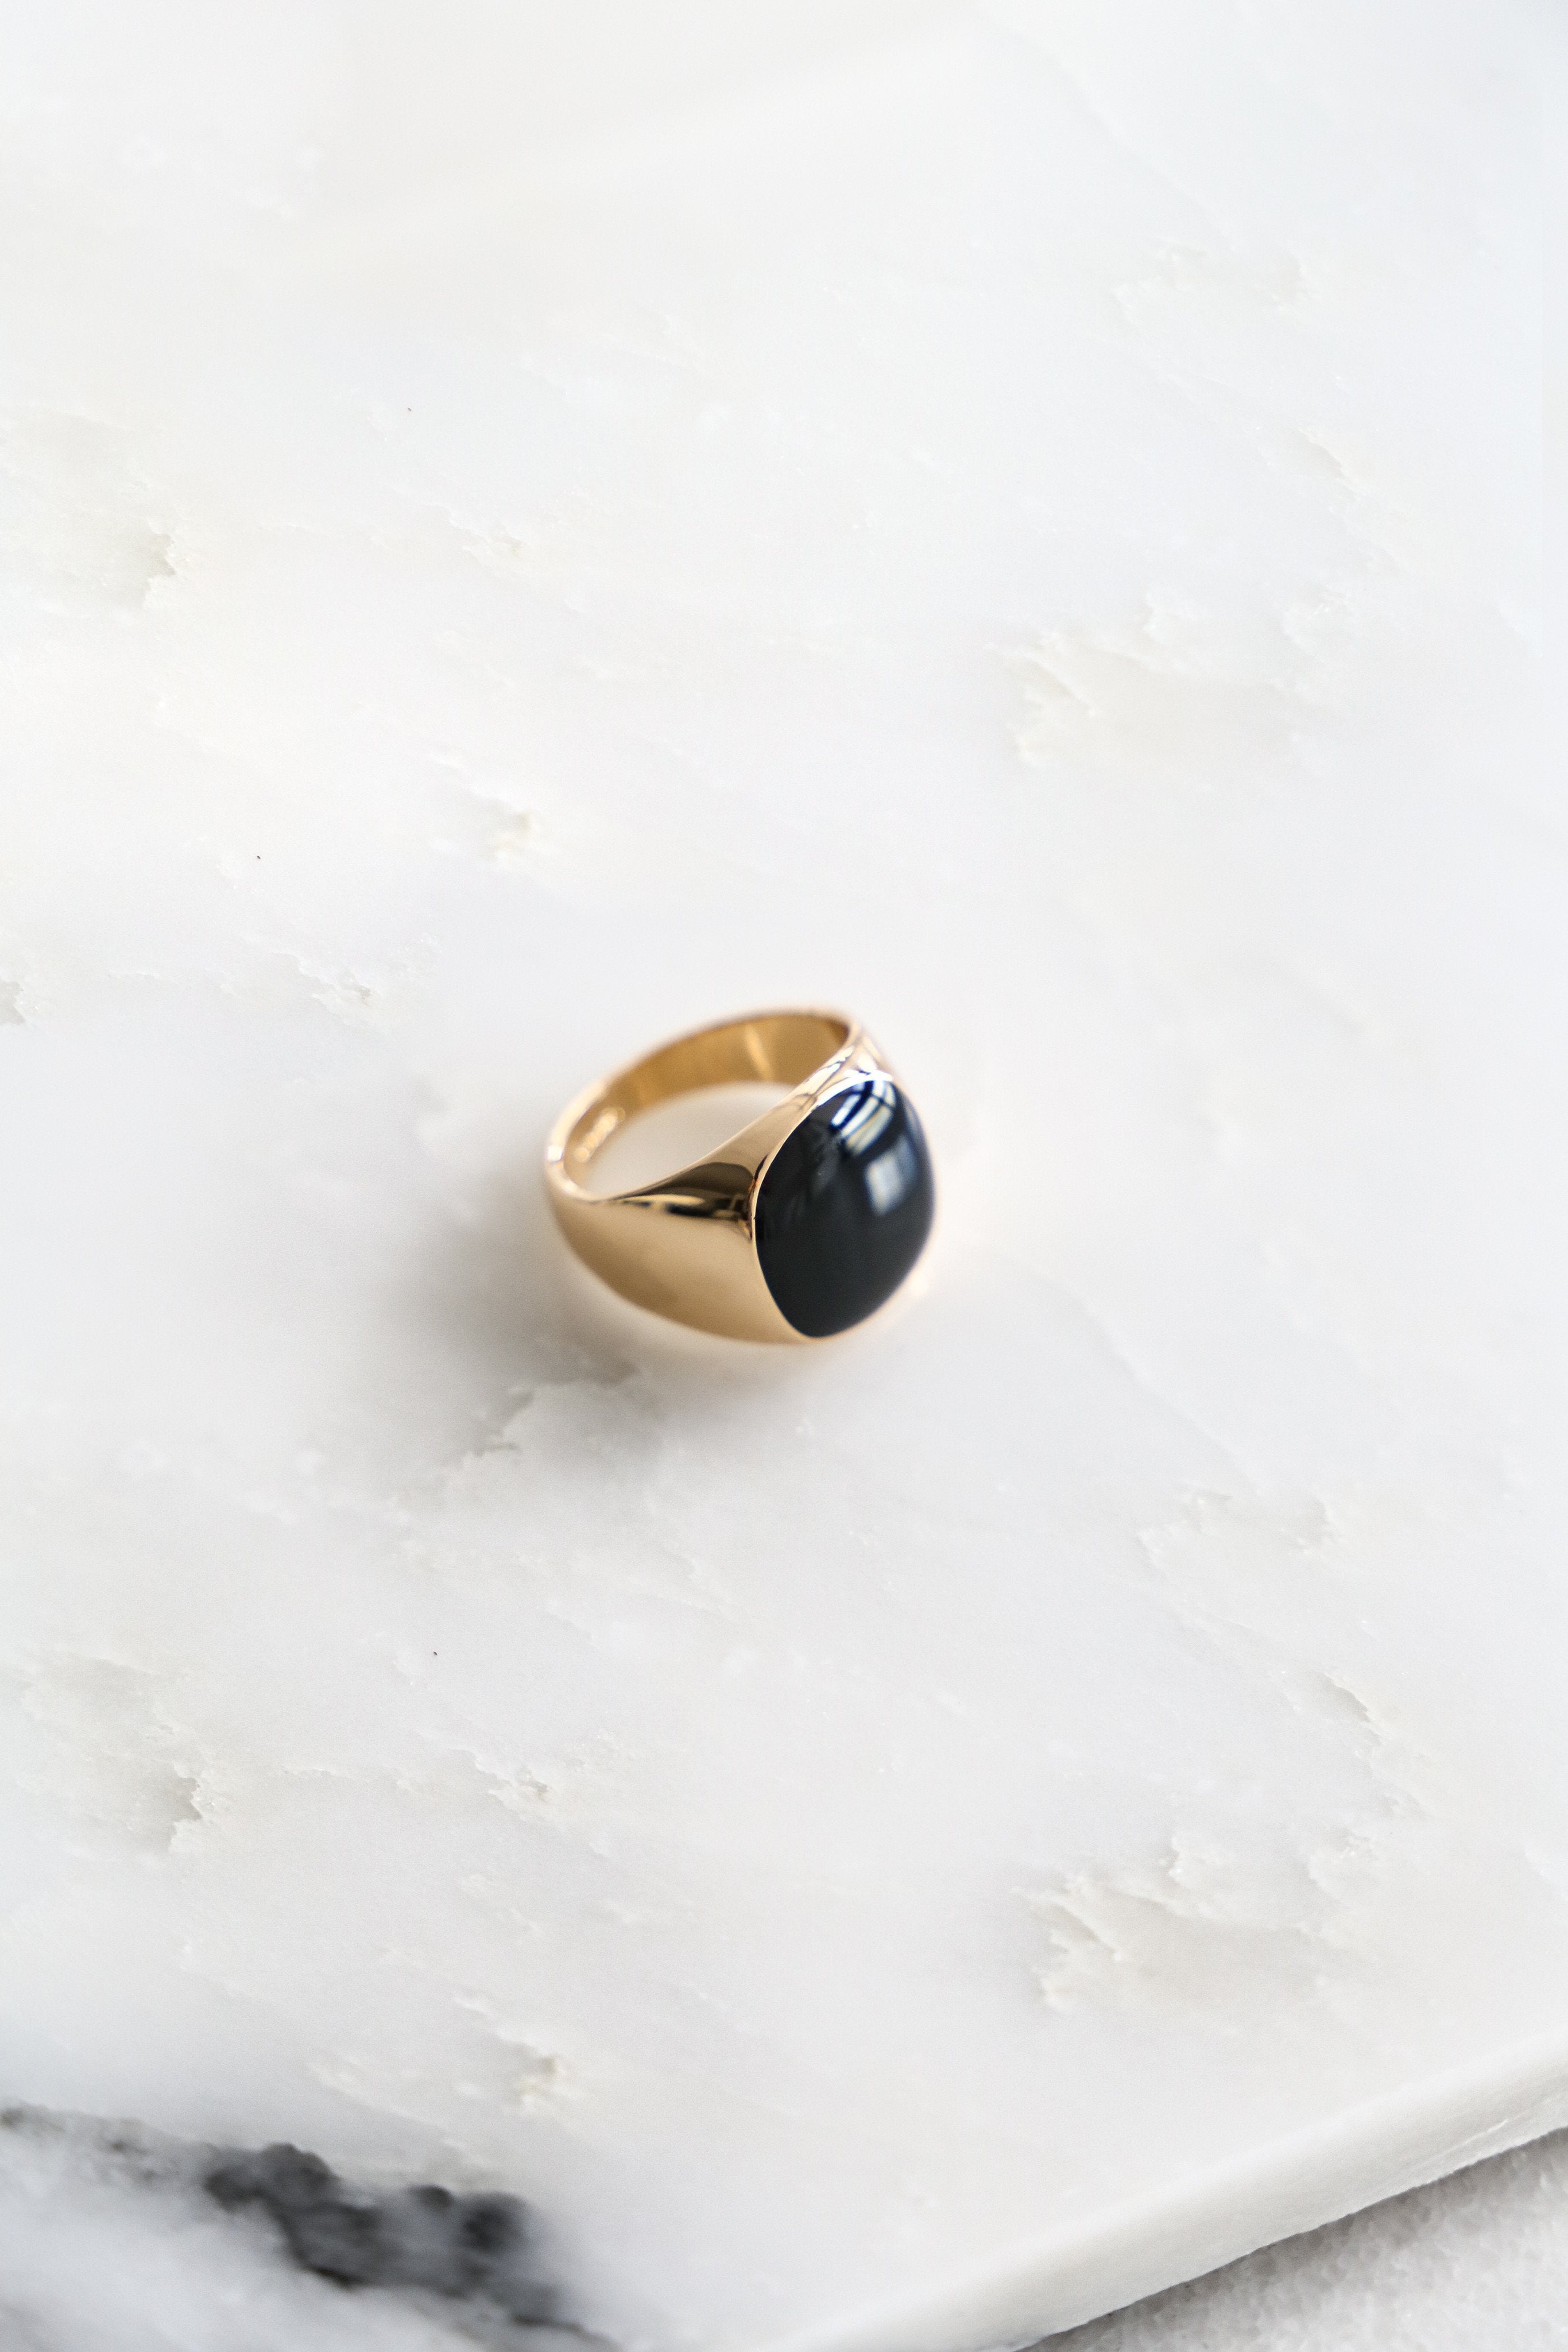 Black Signet Ring - Boutique Minimaliste has waterproof, durable, elegant and vintage inspired jewelry